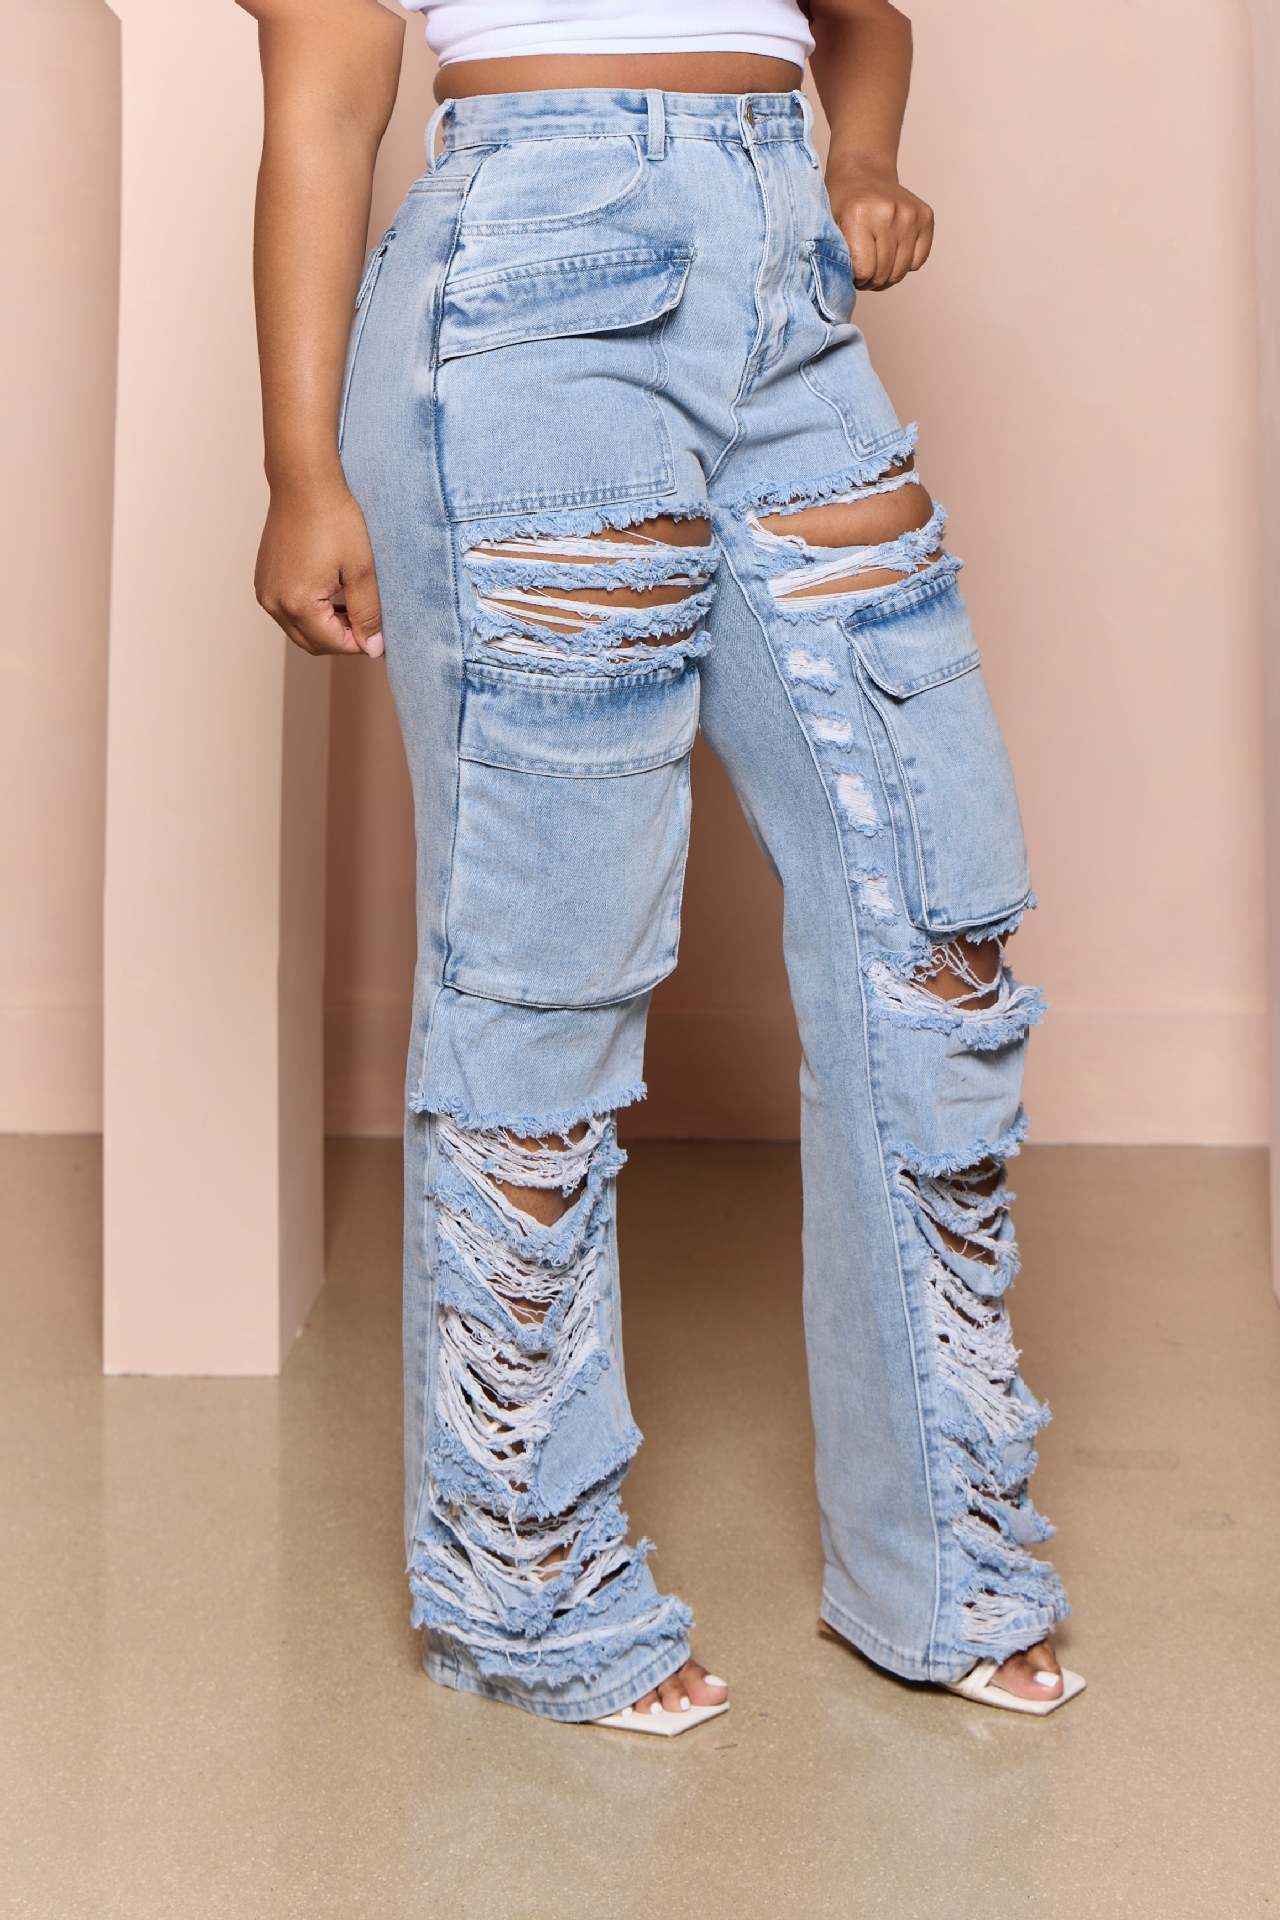 Multi Bag Ripped Jeans Women Tooling Ripped Washed Trousers Multi Bag Jeans